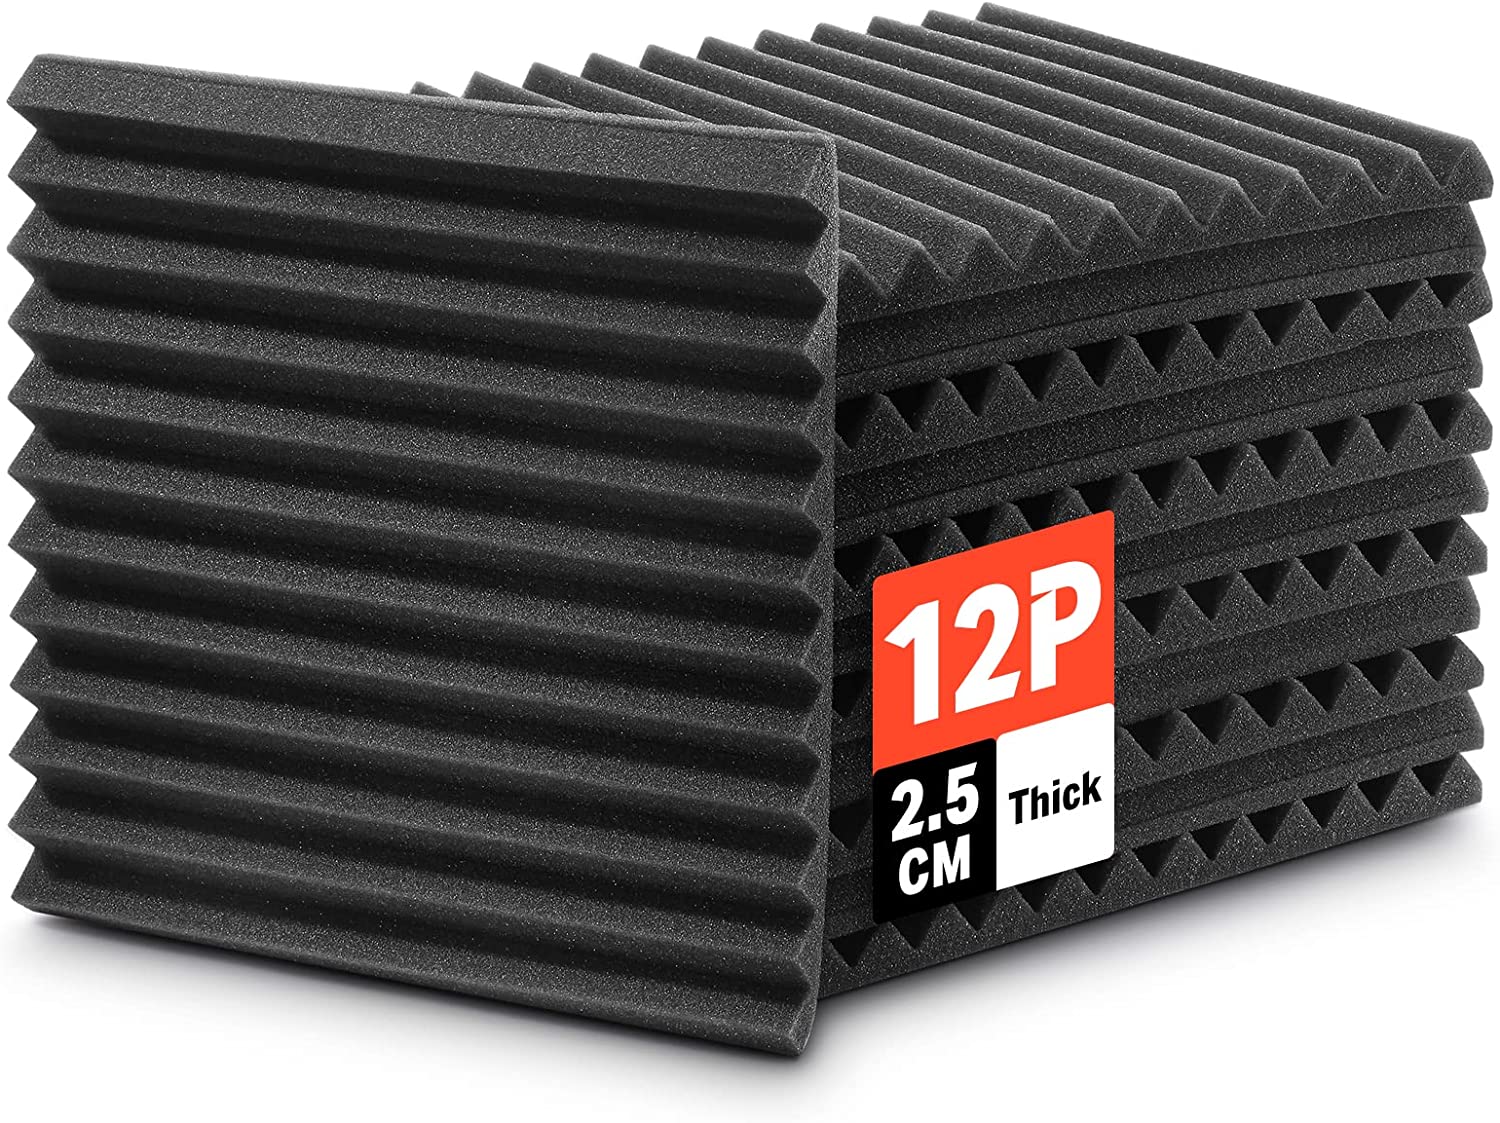 

Donner 12-Pack Fireproof Acoustic Foam Panels, 1 Inch